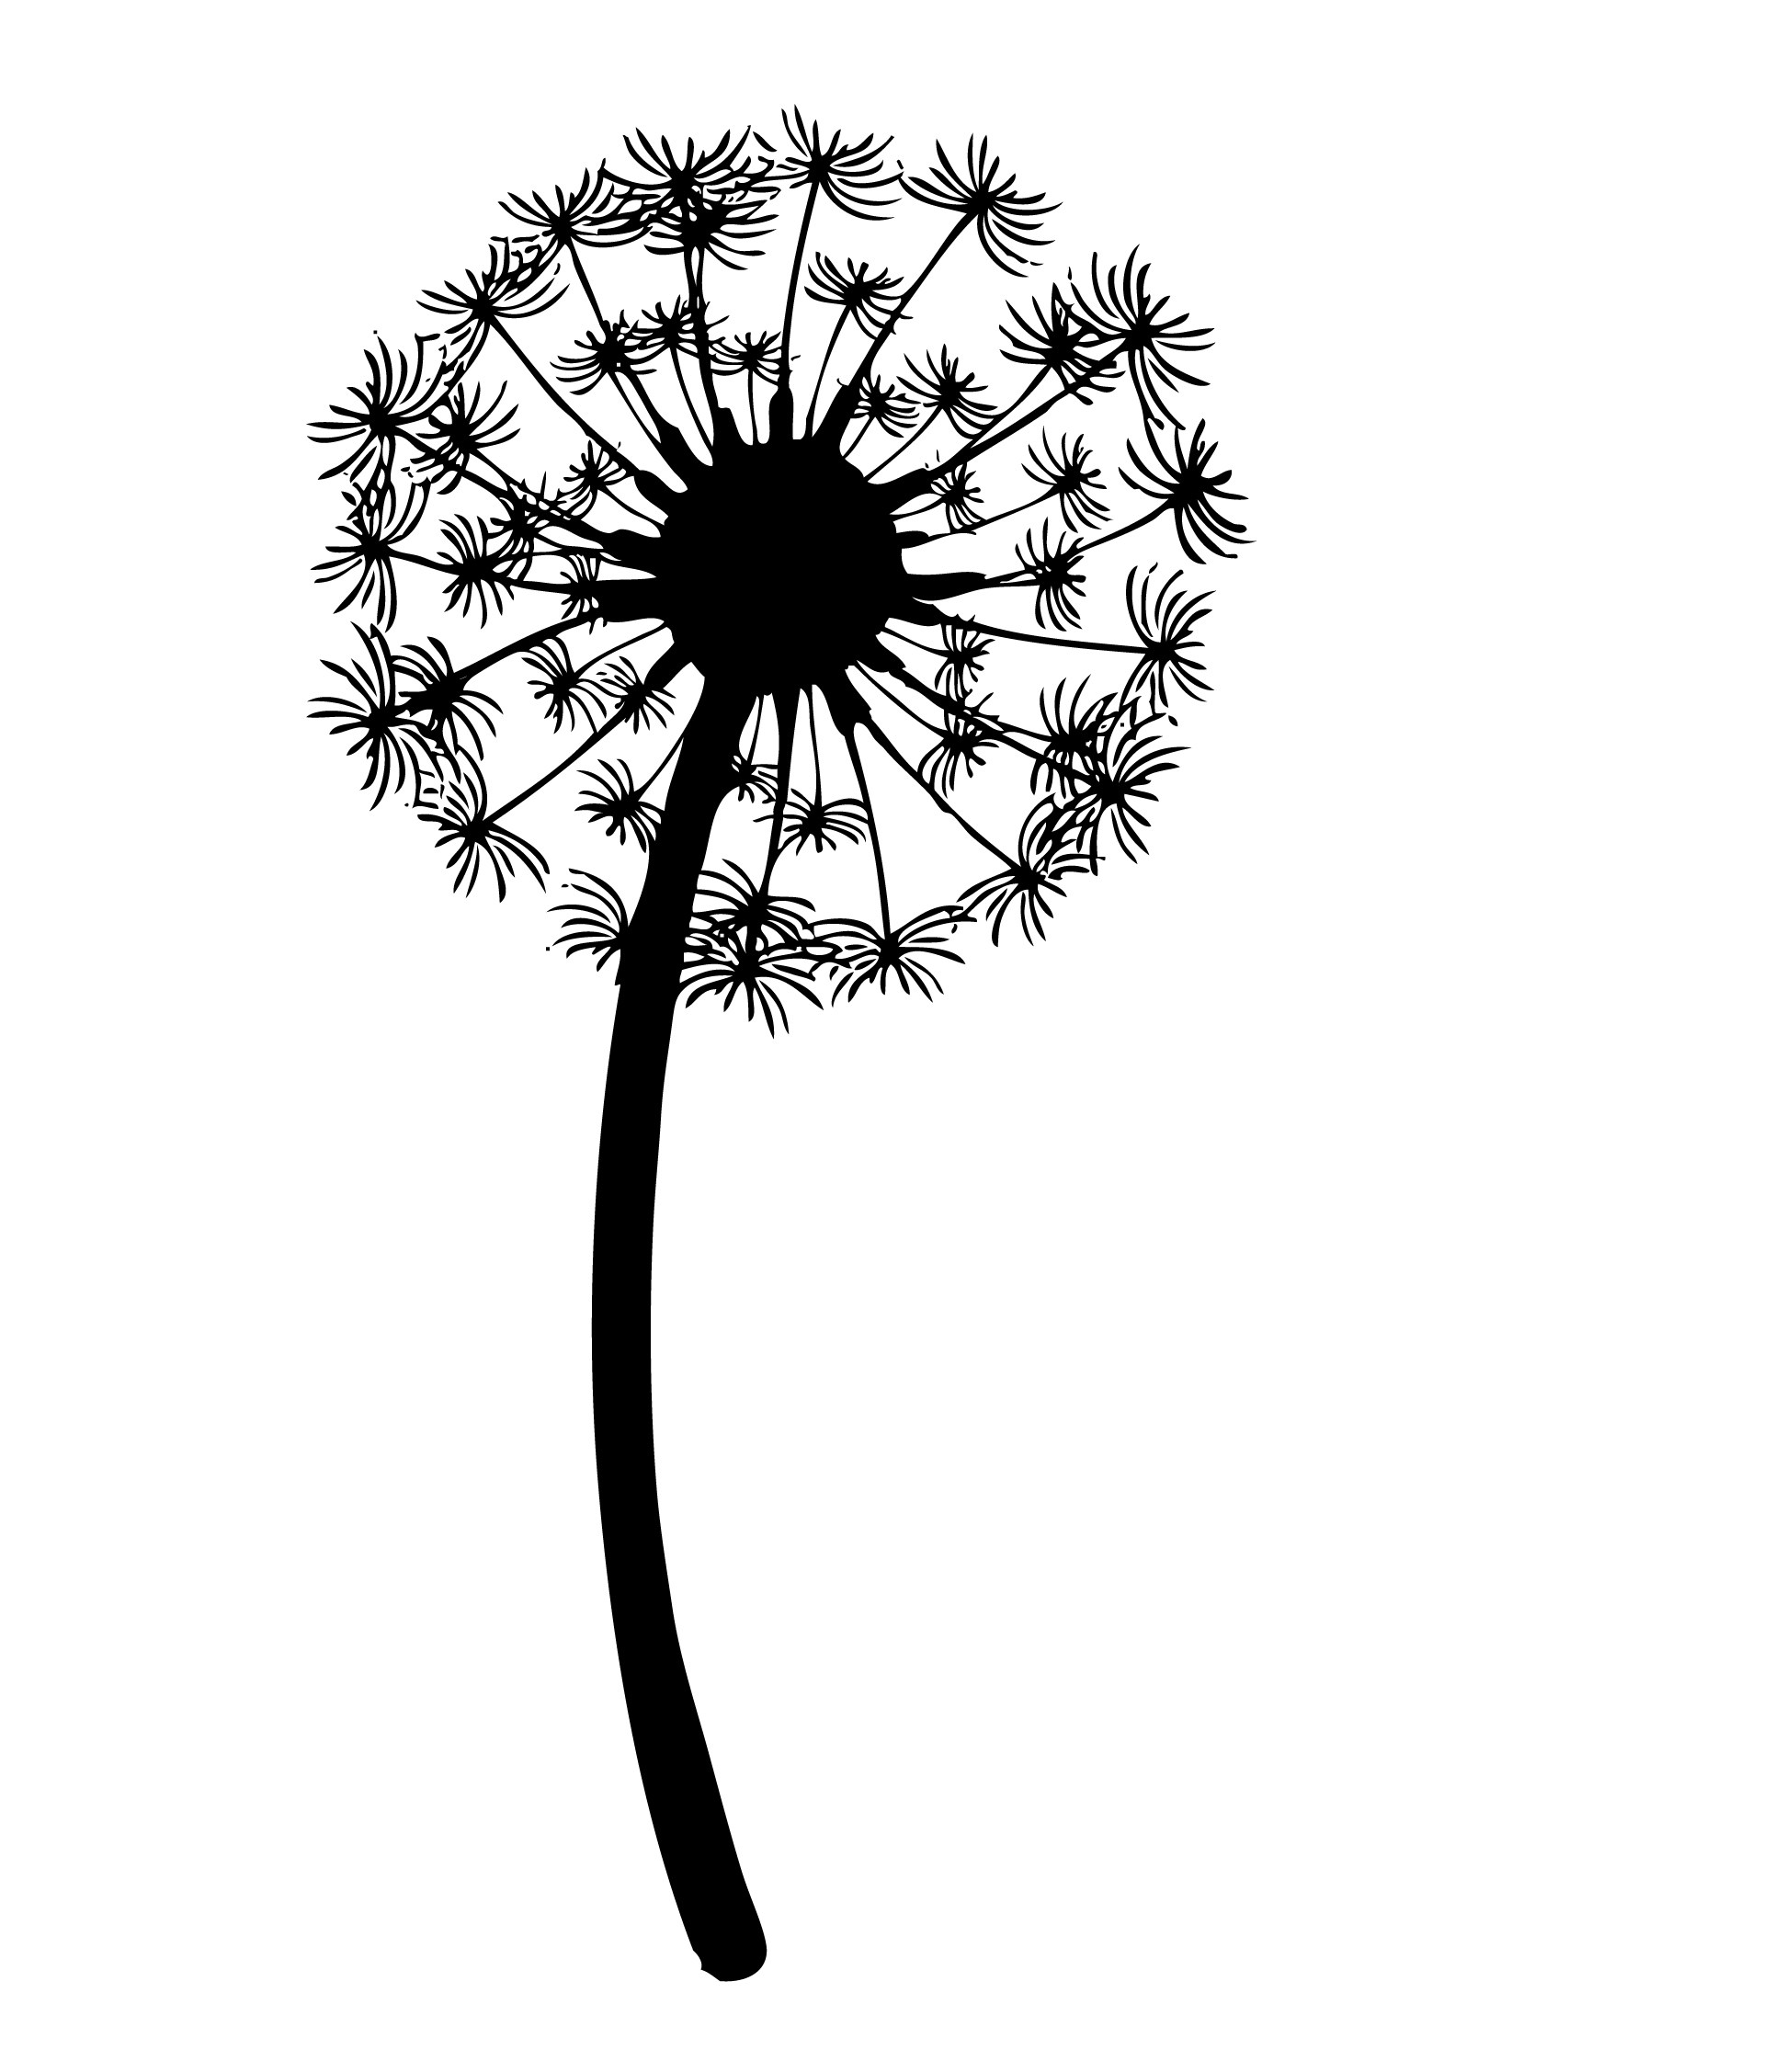 dandelion-black-and-white-drawing-at-getdrawings-free-download